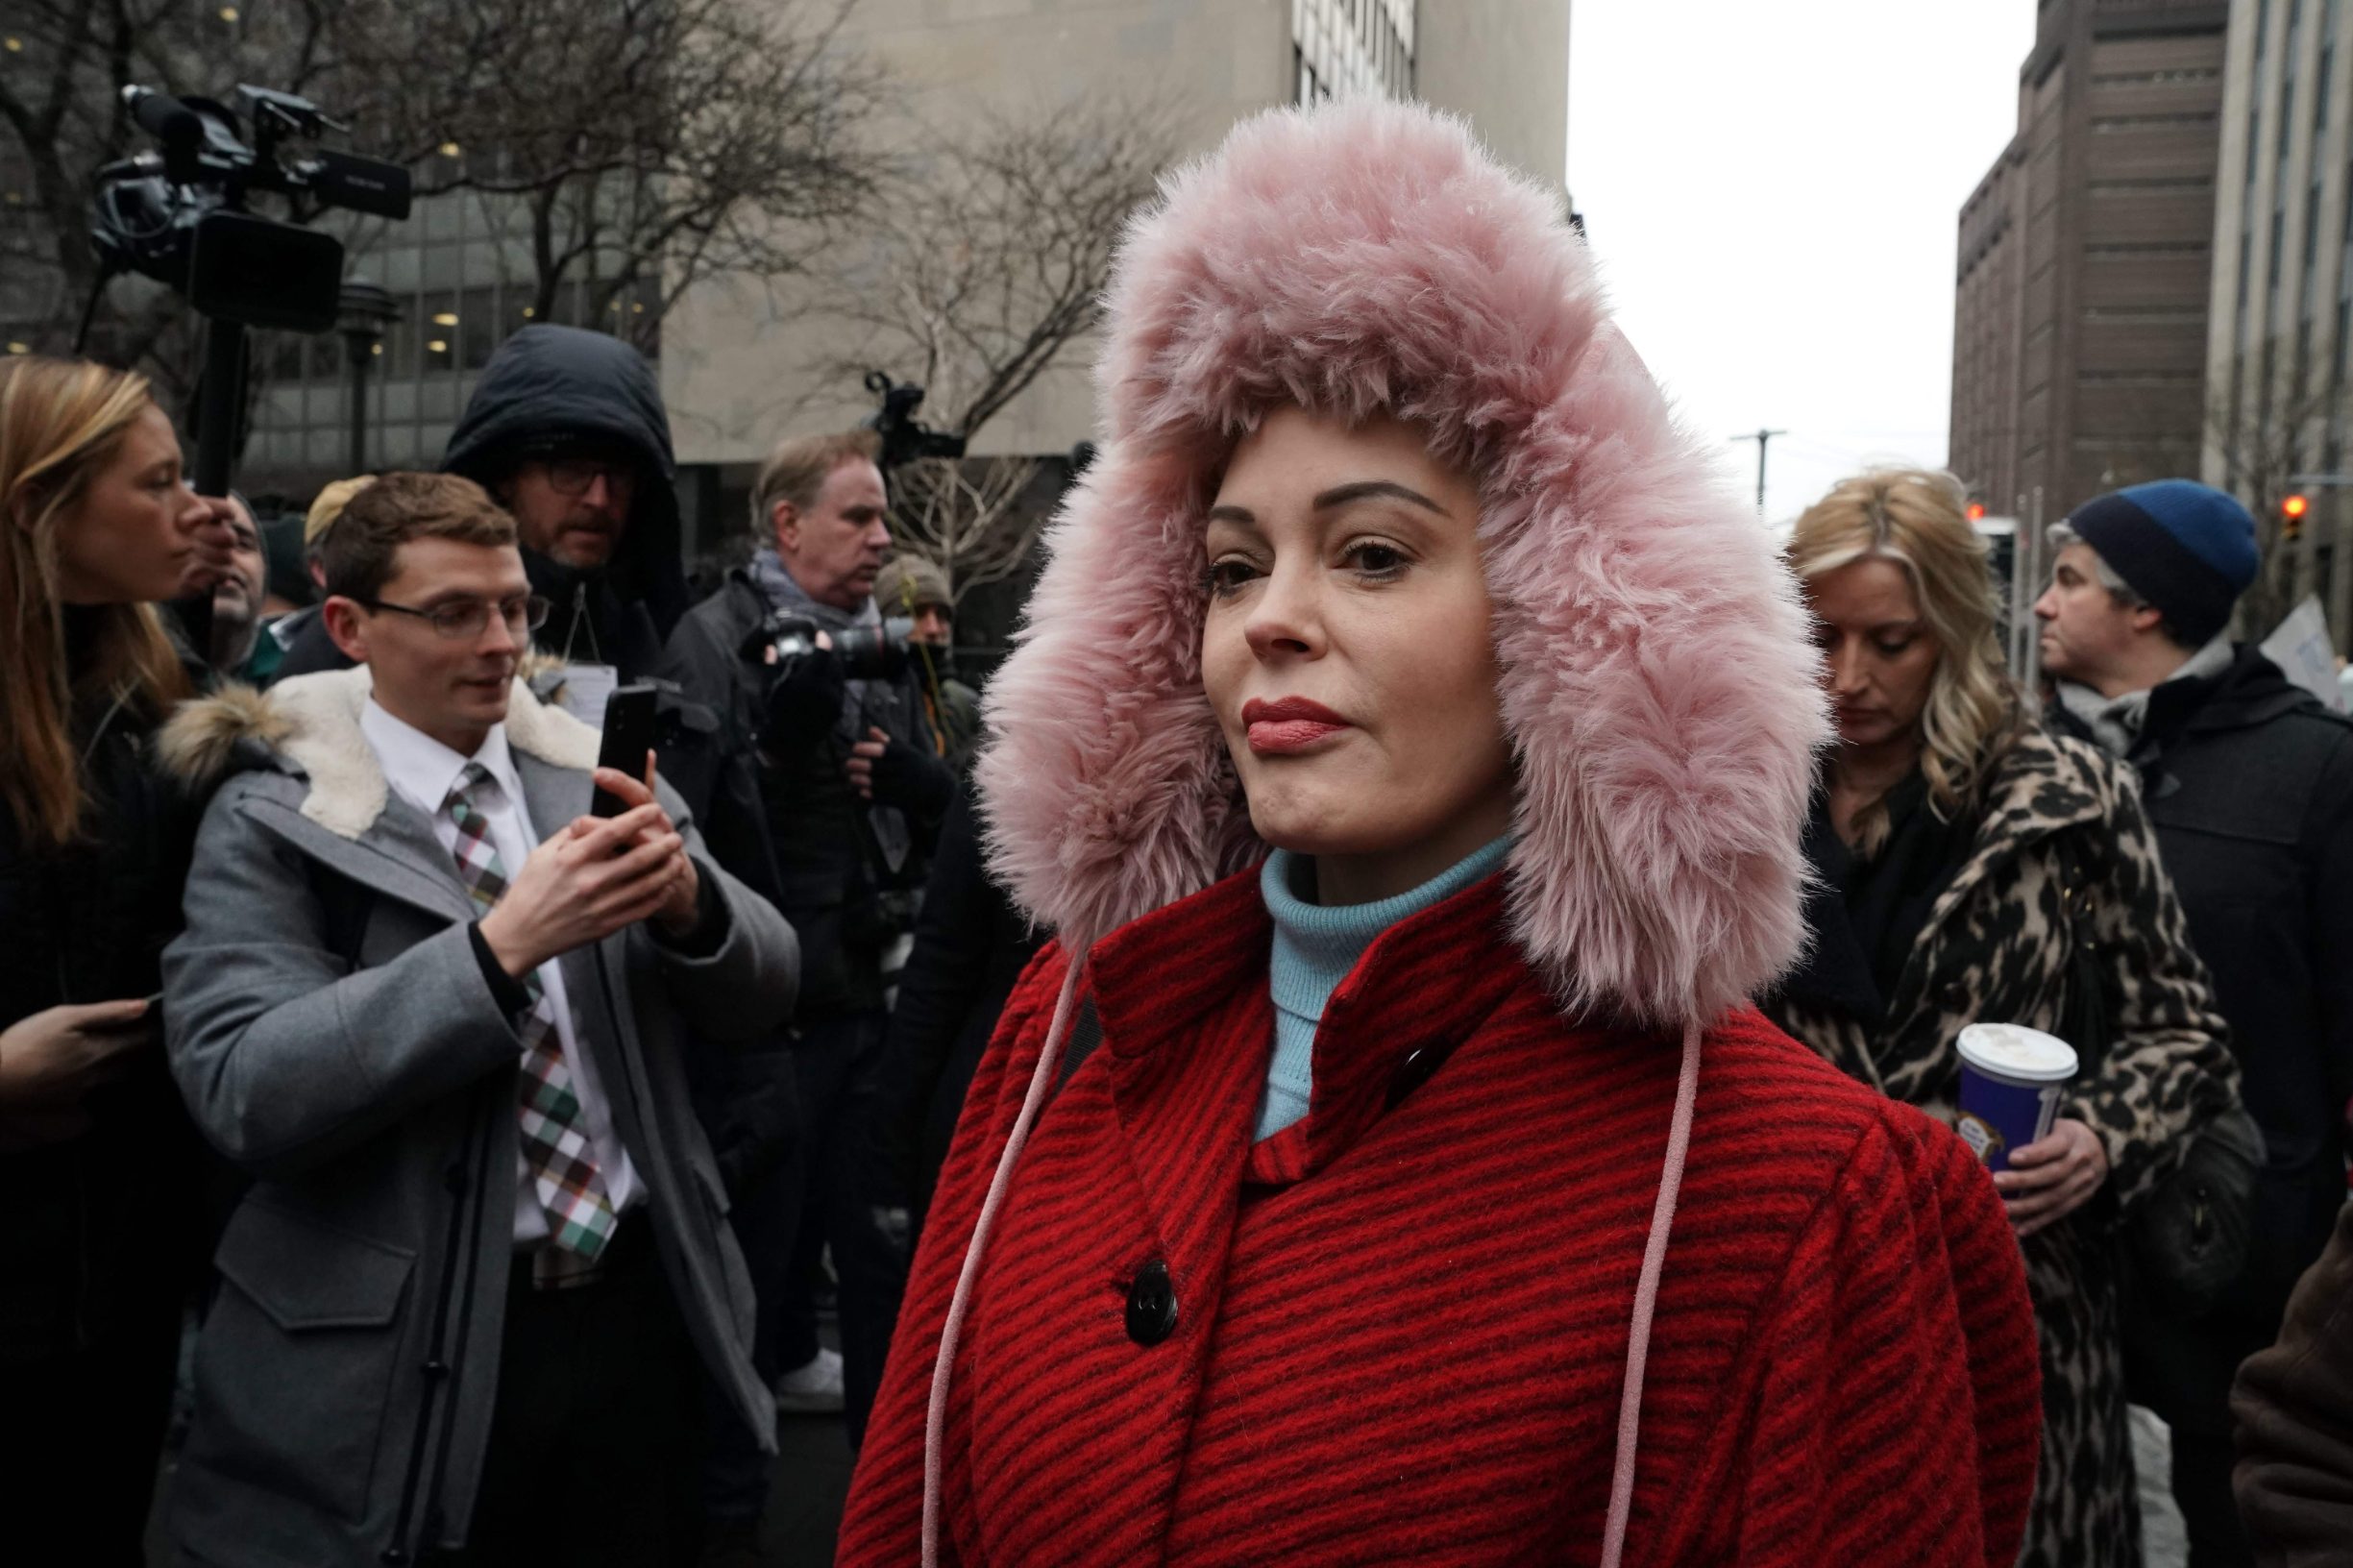 TOPSHOT - Actress Rose McGowan arrives for a press conference after Harvey Weinstein arrived at State Supreme Court in Manhattan January 6, 2020 on the first day of his criminal trial on charges of rape and sexual assault in New York City. - Harvey Weinstein's high-profile sex crimes trial opens on Monday, more than two years after a slew of allegations against the once-mighty Hollywood producer triggered the #MeToo movement that led to the downfall of dozens of powerful men. The disgraced movie mogul faces life in prison if convicted in a New York state court of predatory sexual assault charges, in a trial expected to last six weeks. (Photo by TIMOTHY A. CLARY / AFP)